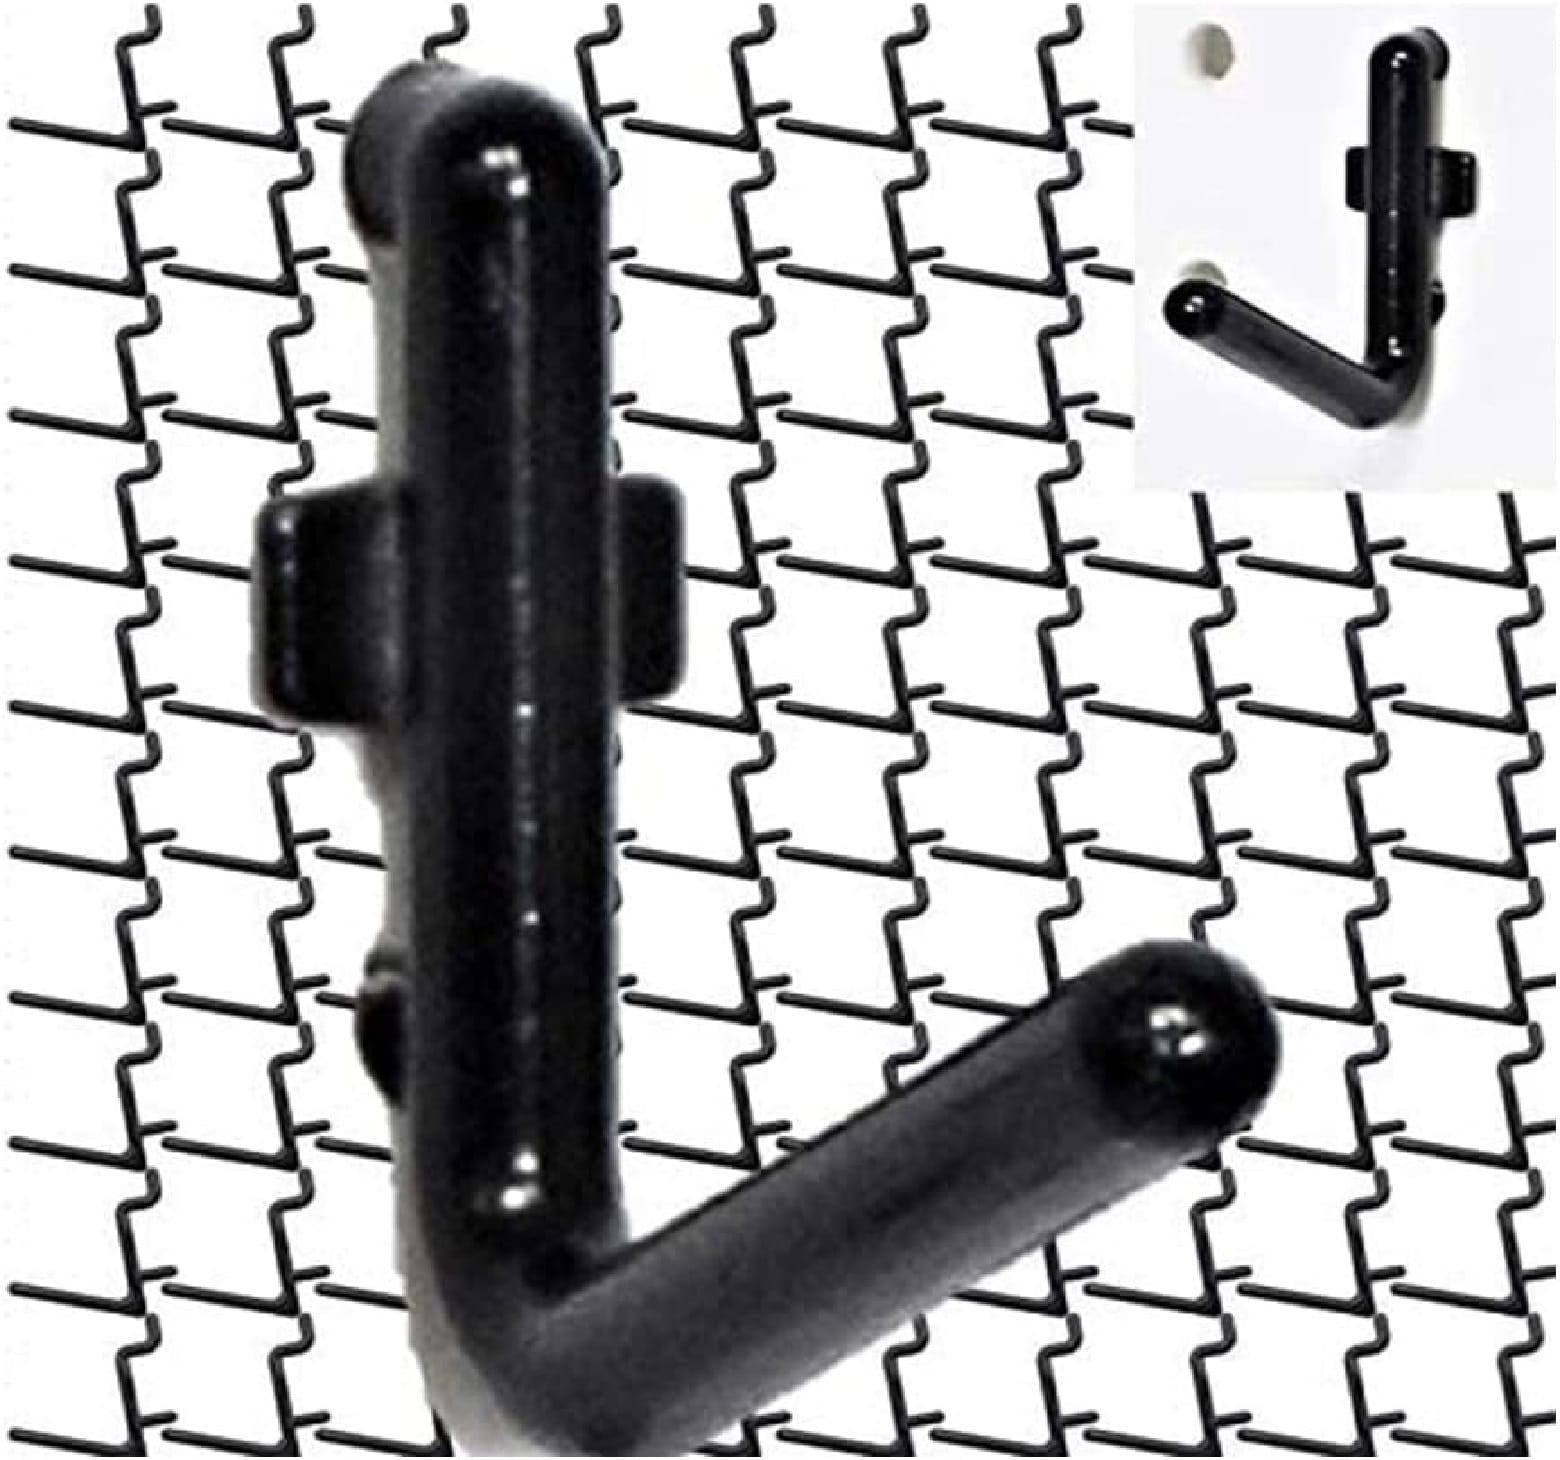 Plastic Pegboard Hooks J-Hooks for peg boards 100 pieces MADE IN USA